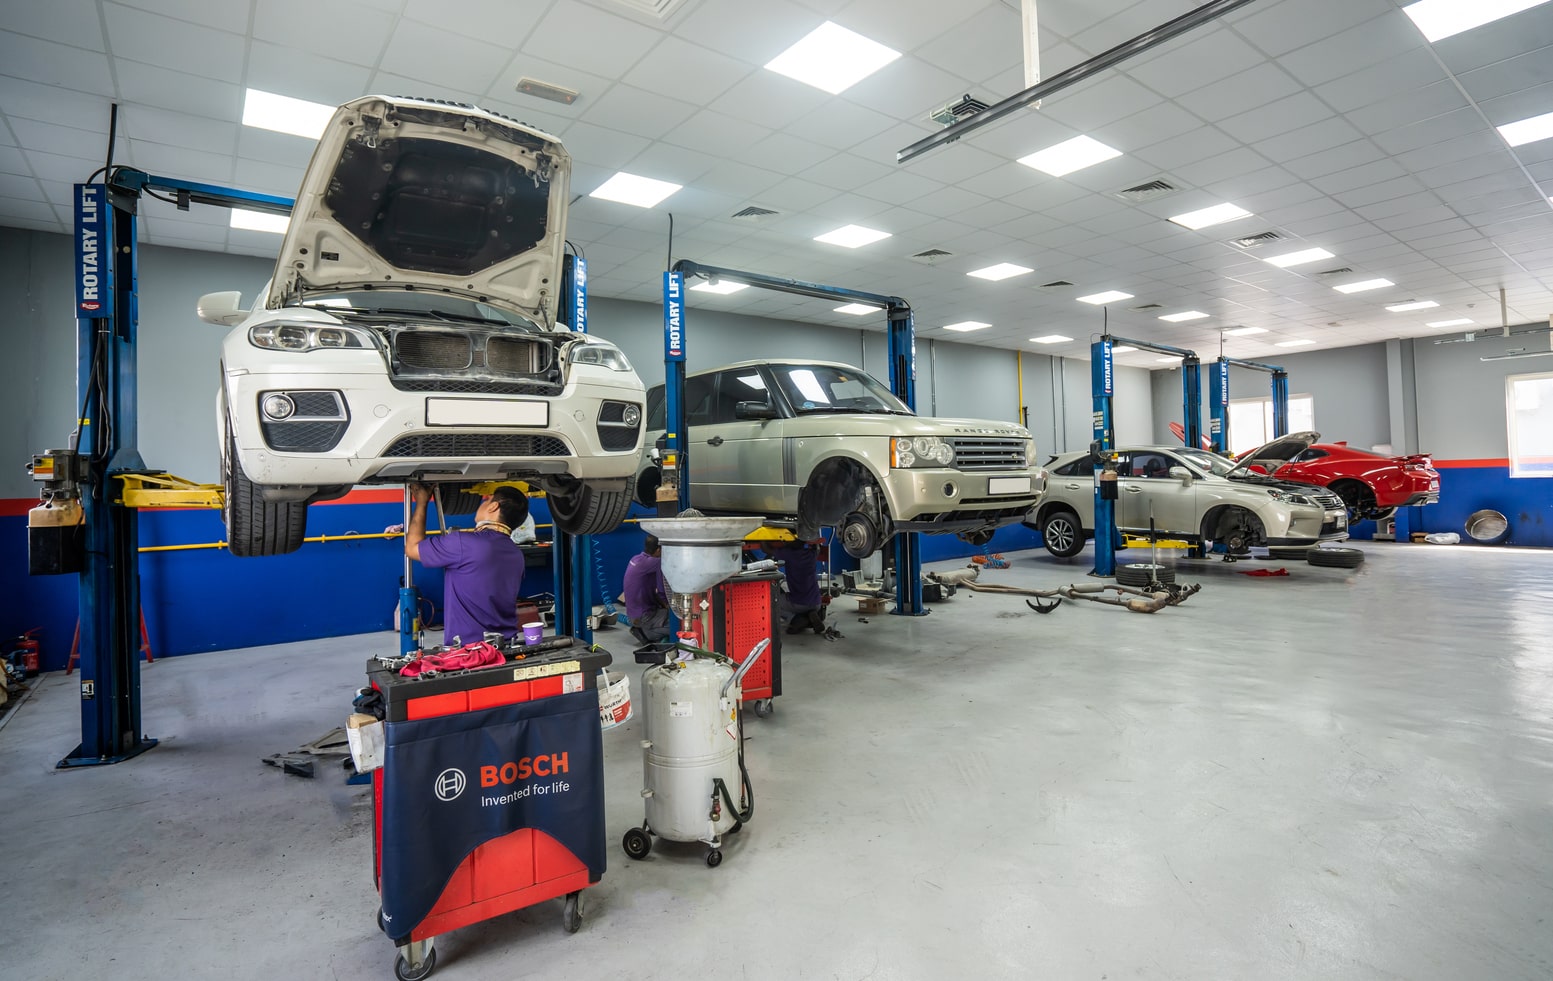 Noisy Brakes or Strange Sounds? Signs Your Car Needs to Visit a Workshop